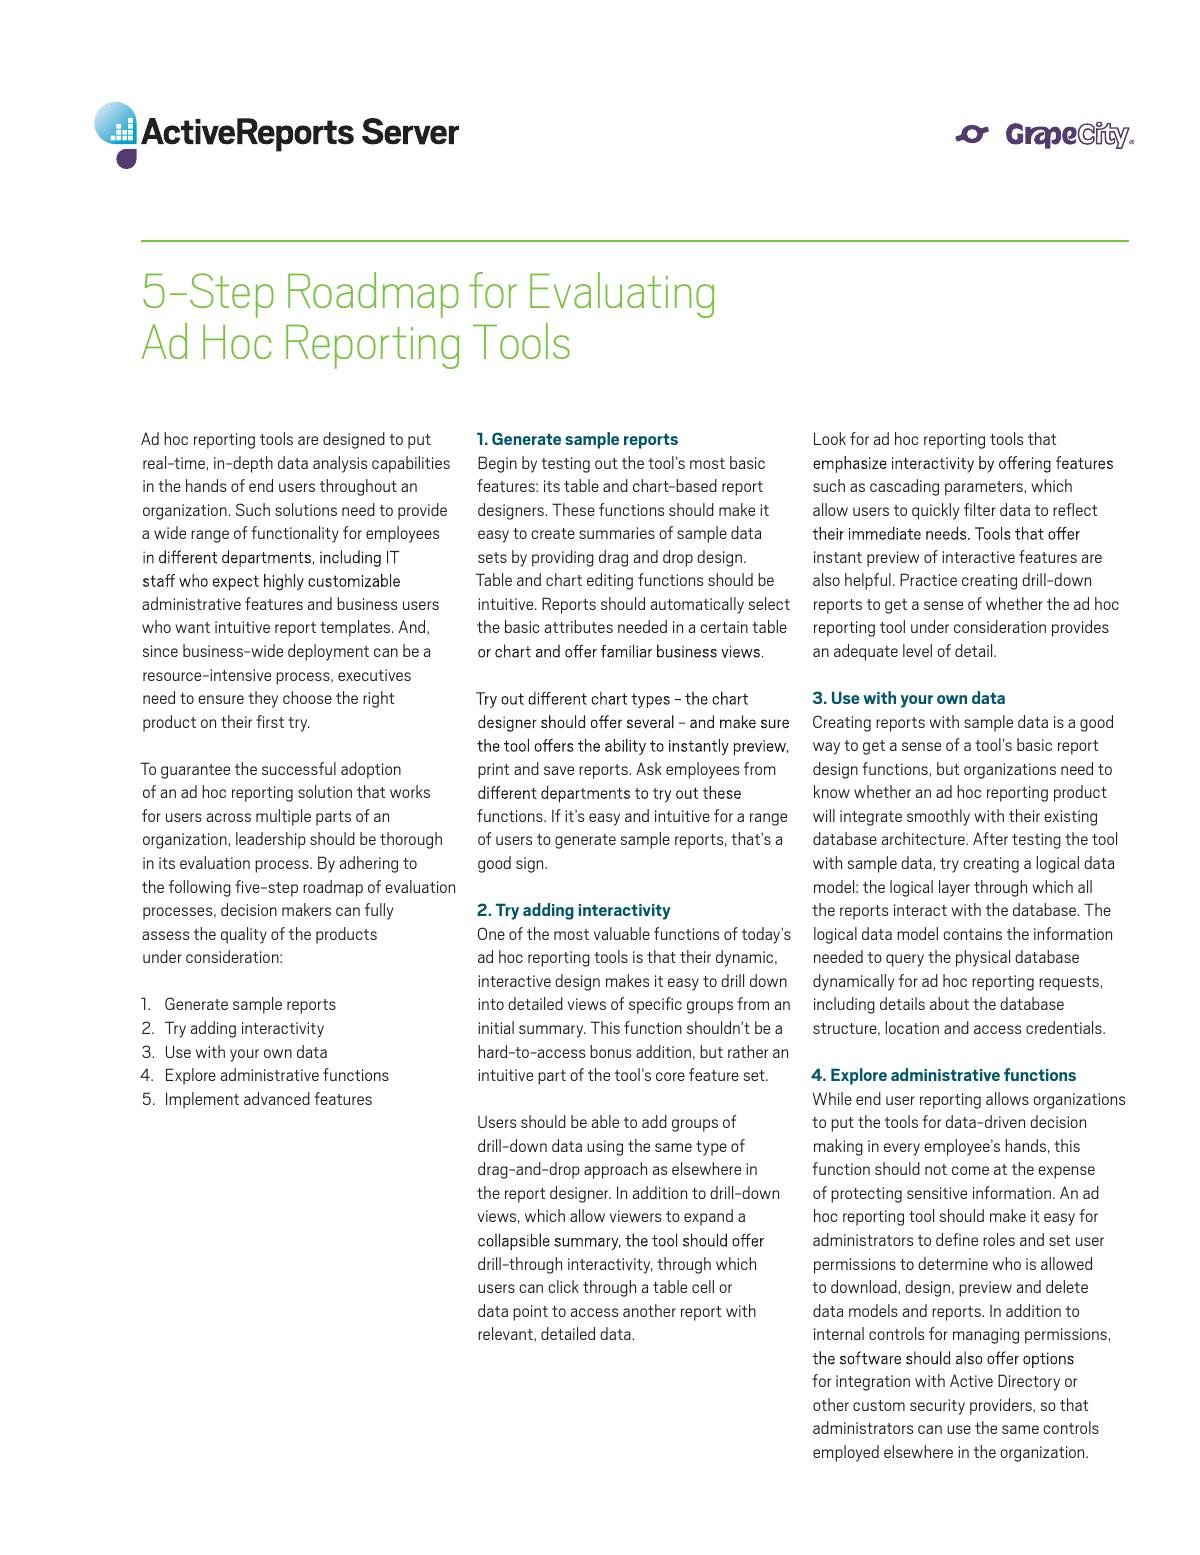 5-Step Roadmap for Evaluating Ad Hoc Reporting Tools